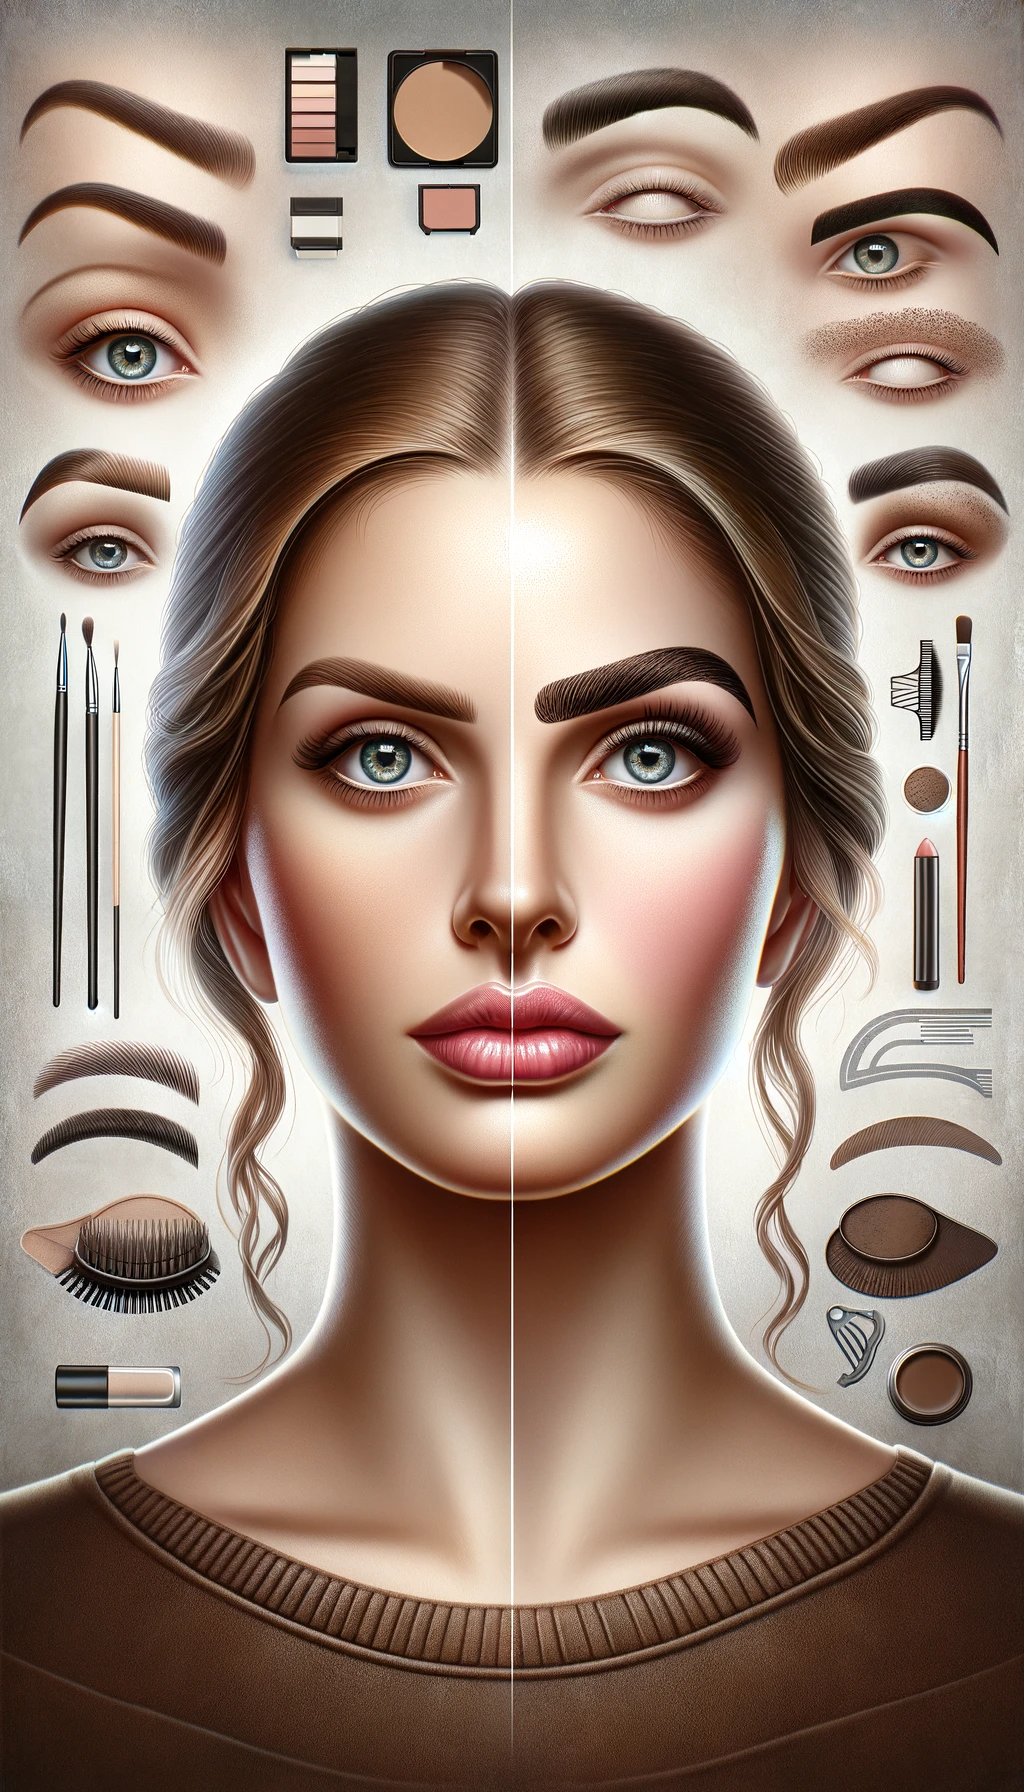 A detailed portrait representing Powder Brows Before and After 10 Game Changing Tips for Flawless Brows. The image features a European woman half